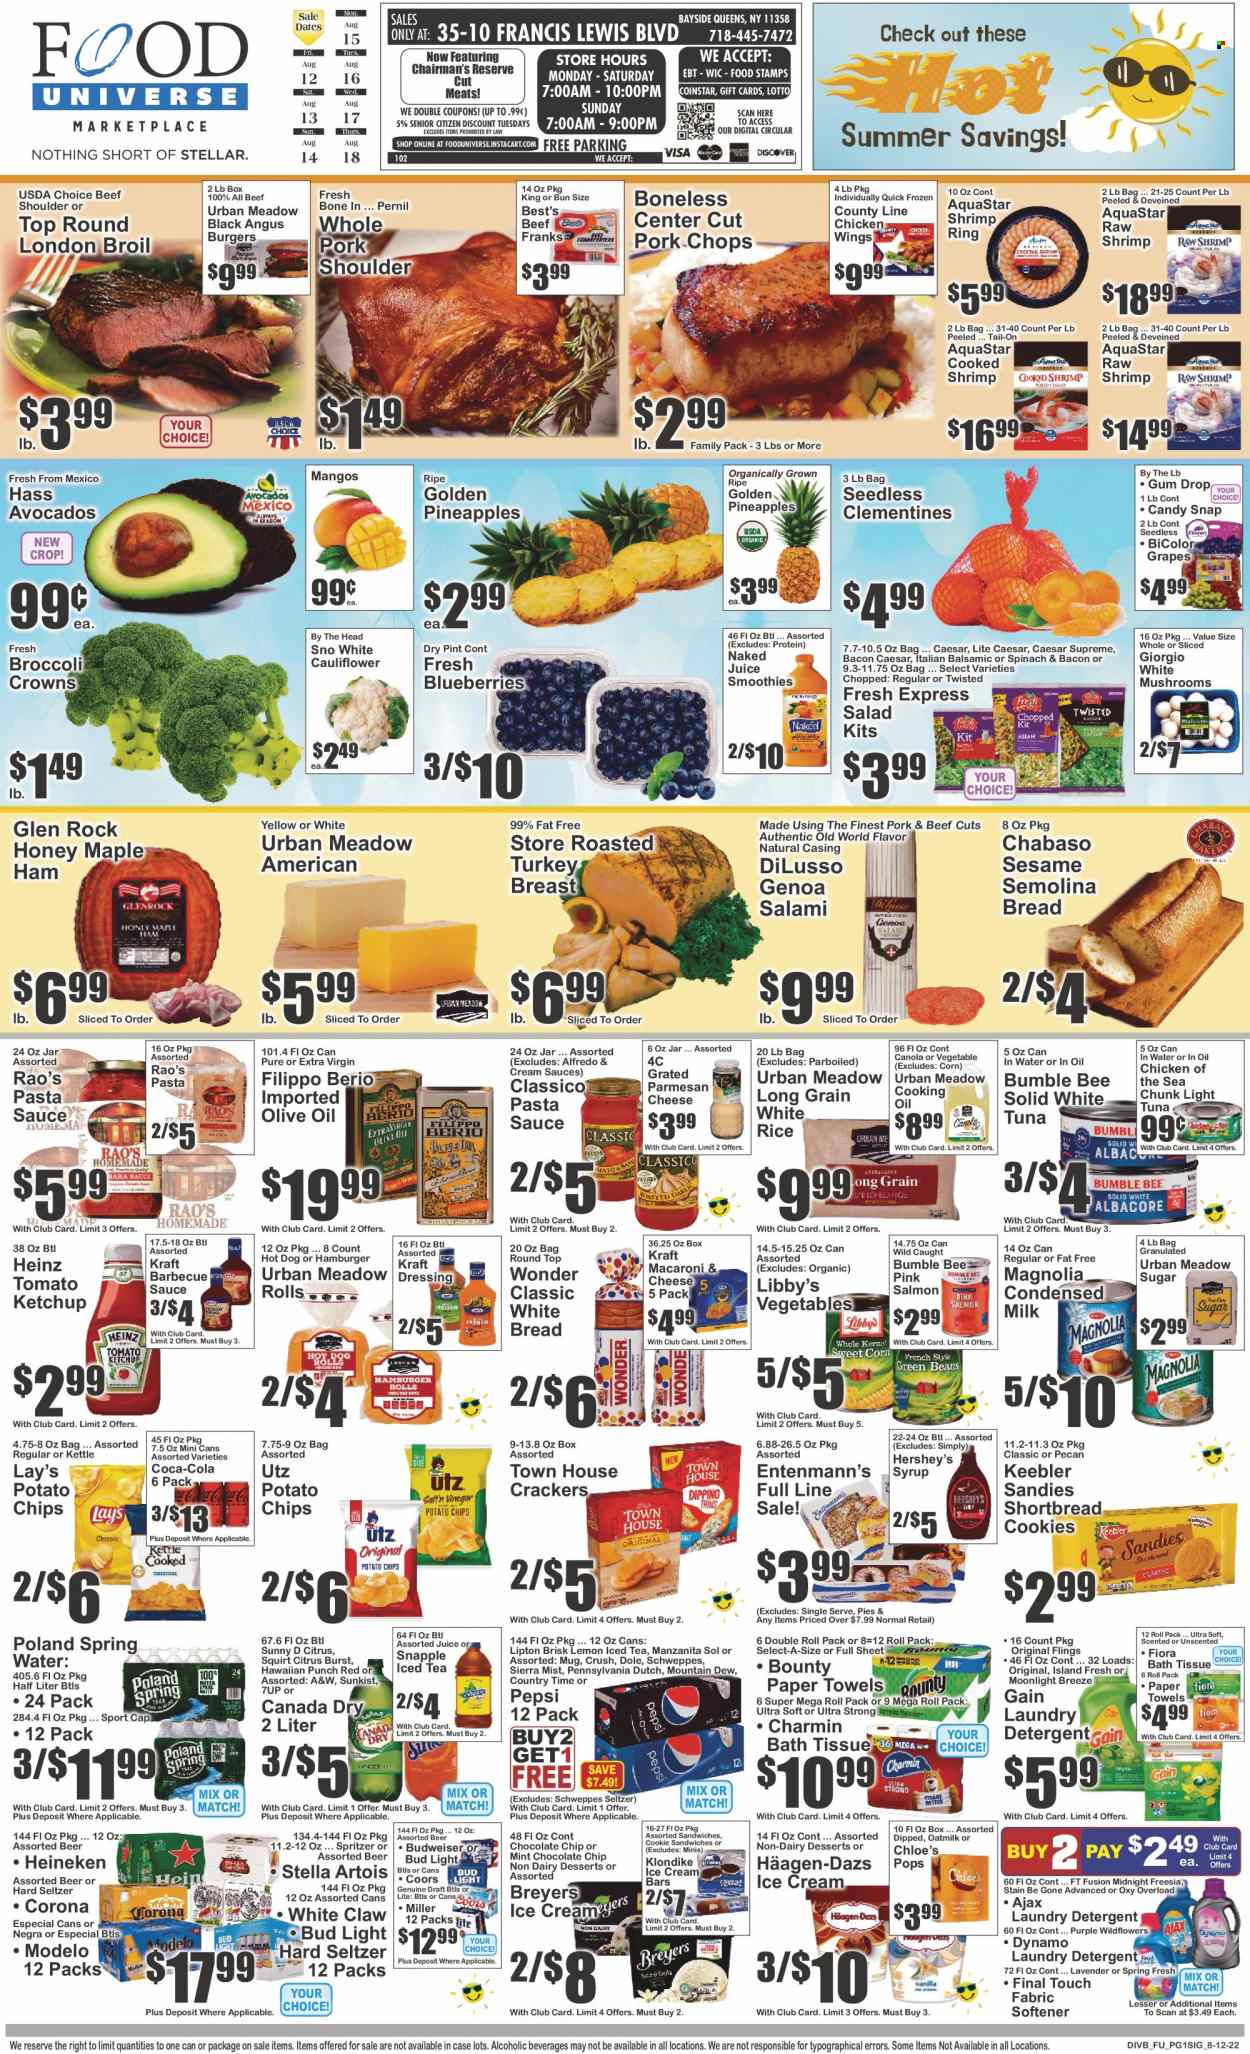 thumbnail - Food Universe Flyer - 08/12/2022 - 08/18/2022 - Sales products - mushrooms, bread, white bread, Entenmann's, corn, salad, Dole, avocado, blueberries, grapes, pineapple, salmon, tuna, shrimps, macaroni & cheese, hot dog, pasta sauce, sandwich, hamburger, Bumble Bee, Kraft®, salami, ham, parmesan, milk, condensed milk, oat milk, ice cream, ice cream bars, Hershey's, Häagen-Dazs, chicken wings, cookies, Bounty, crackers, Keebler, potato chips, Lay’s, semolina, sugar, Heinz, light tuna, Chicken of the Sea, rice, BBQ sauce, ketchup, dressing, Classico, extra virgin olive oil, olive oil, honey, syrup, Canada Dry, Coca-Cola, Mountain Dew, Schweppes, Pepsi, juice, Lipton, ice tea, 7UP, Snapple, A&W, Sierra Mist, Country Time, smoothie, spring water, White Claw, Hard Seltzer, beer, Bud Light, Corona Extra, Heineken, Miller, Sol, Modelo, pork chops, pork meat, pork shoulder, bath tissue, kitchen towels, paper towels, Charmin, detergent, Gain, Ajax, fabric softener, laundry detergent, Chloé, mug, Lotto, Budweiser, clementines, Stella Artois, Coors. Page 1.